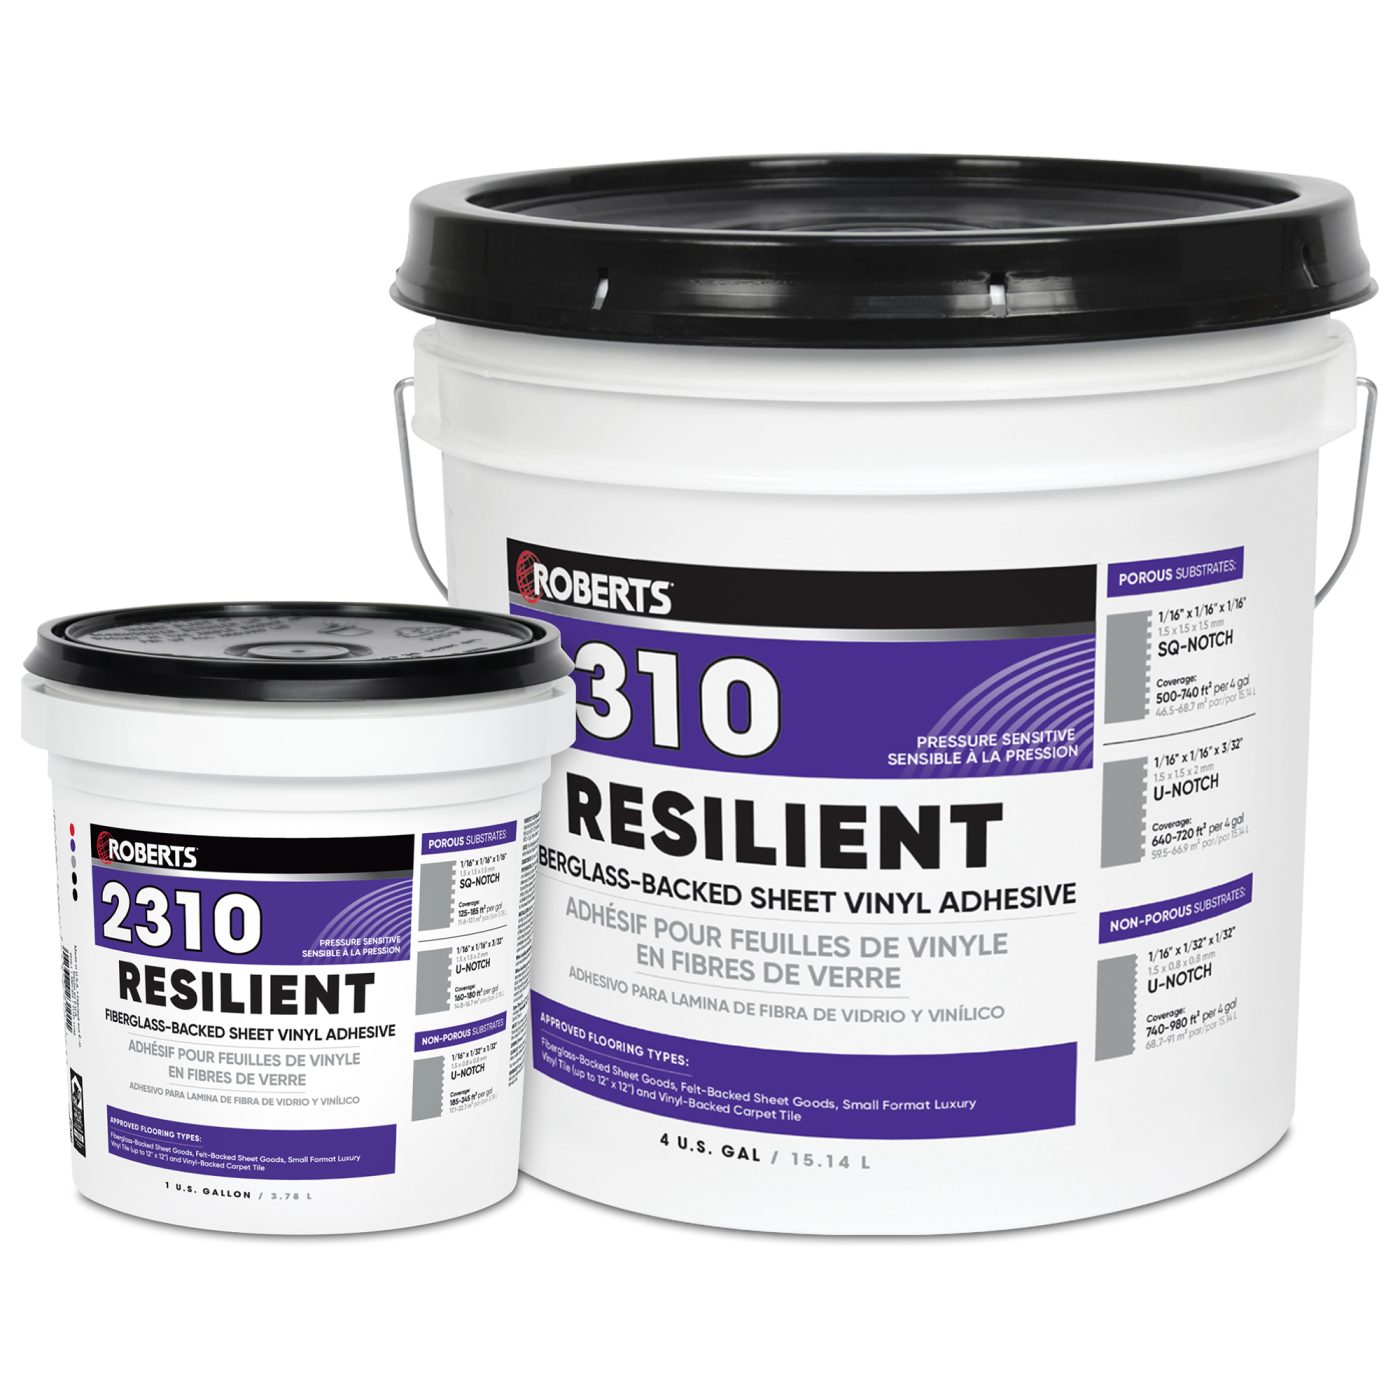 RESILIENT Fiberglass-Back Sheet Vinyl Adhesive - Roberts Consolidated